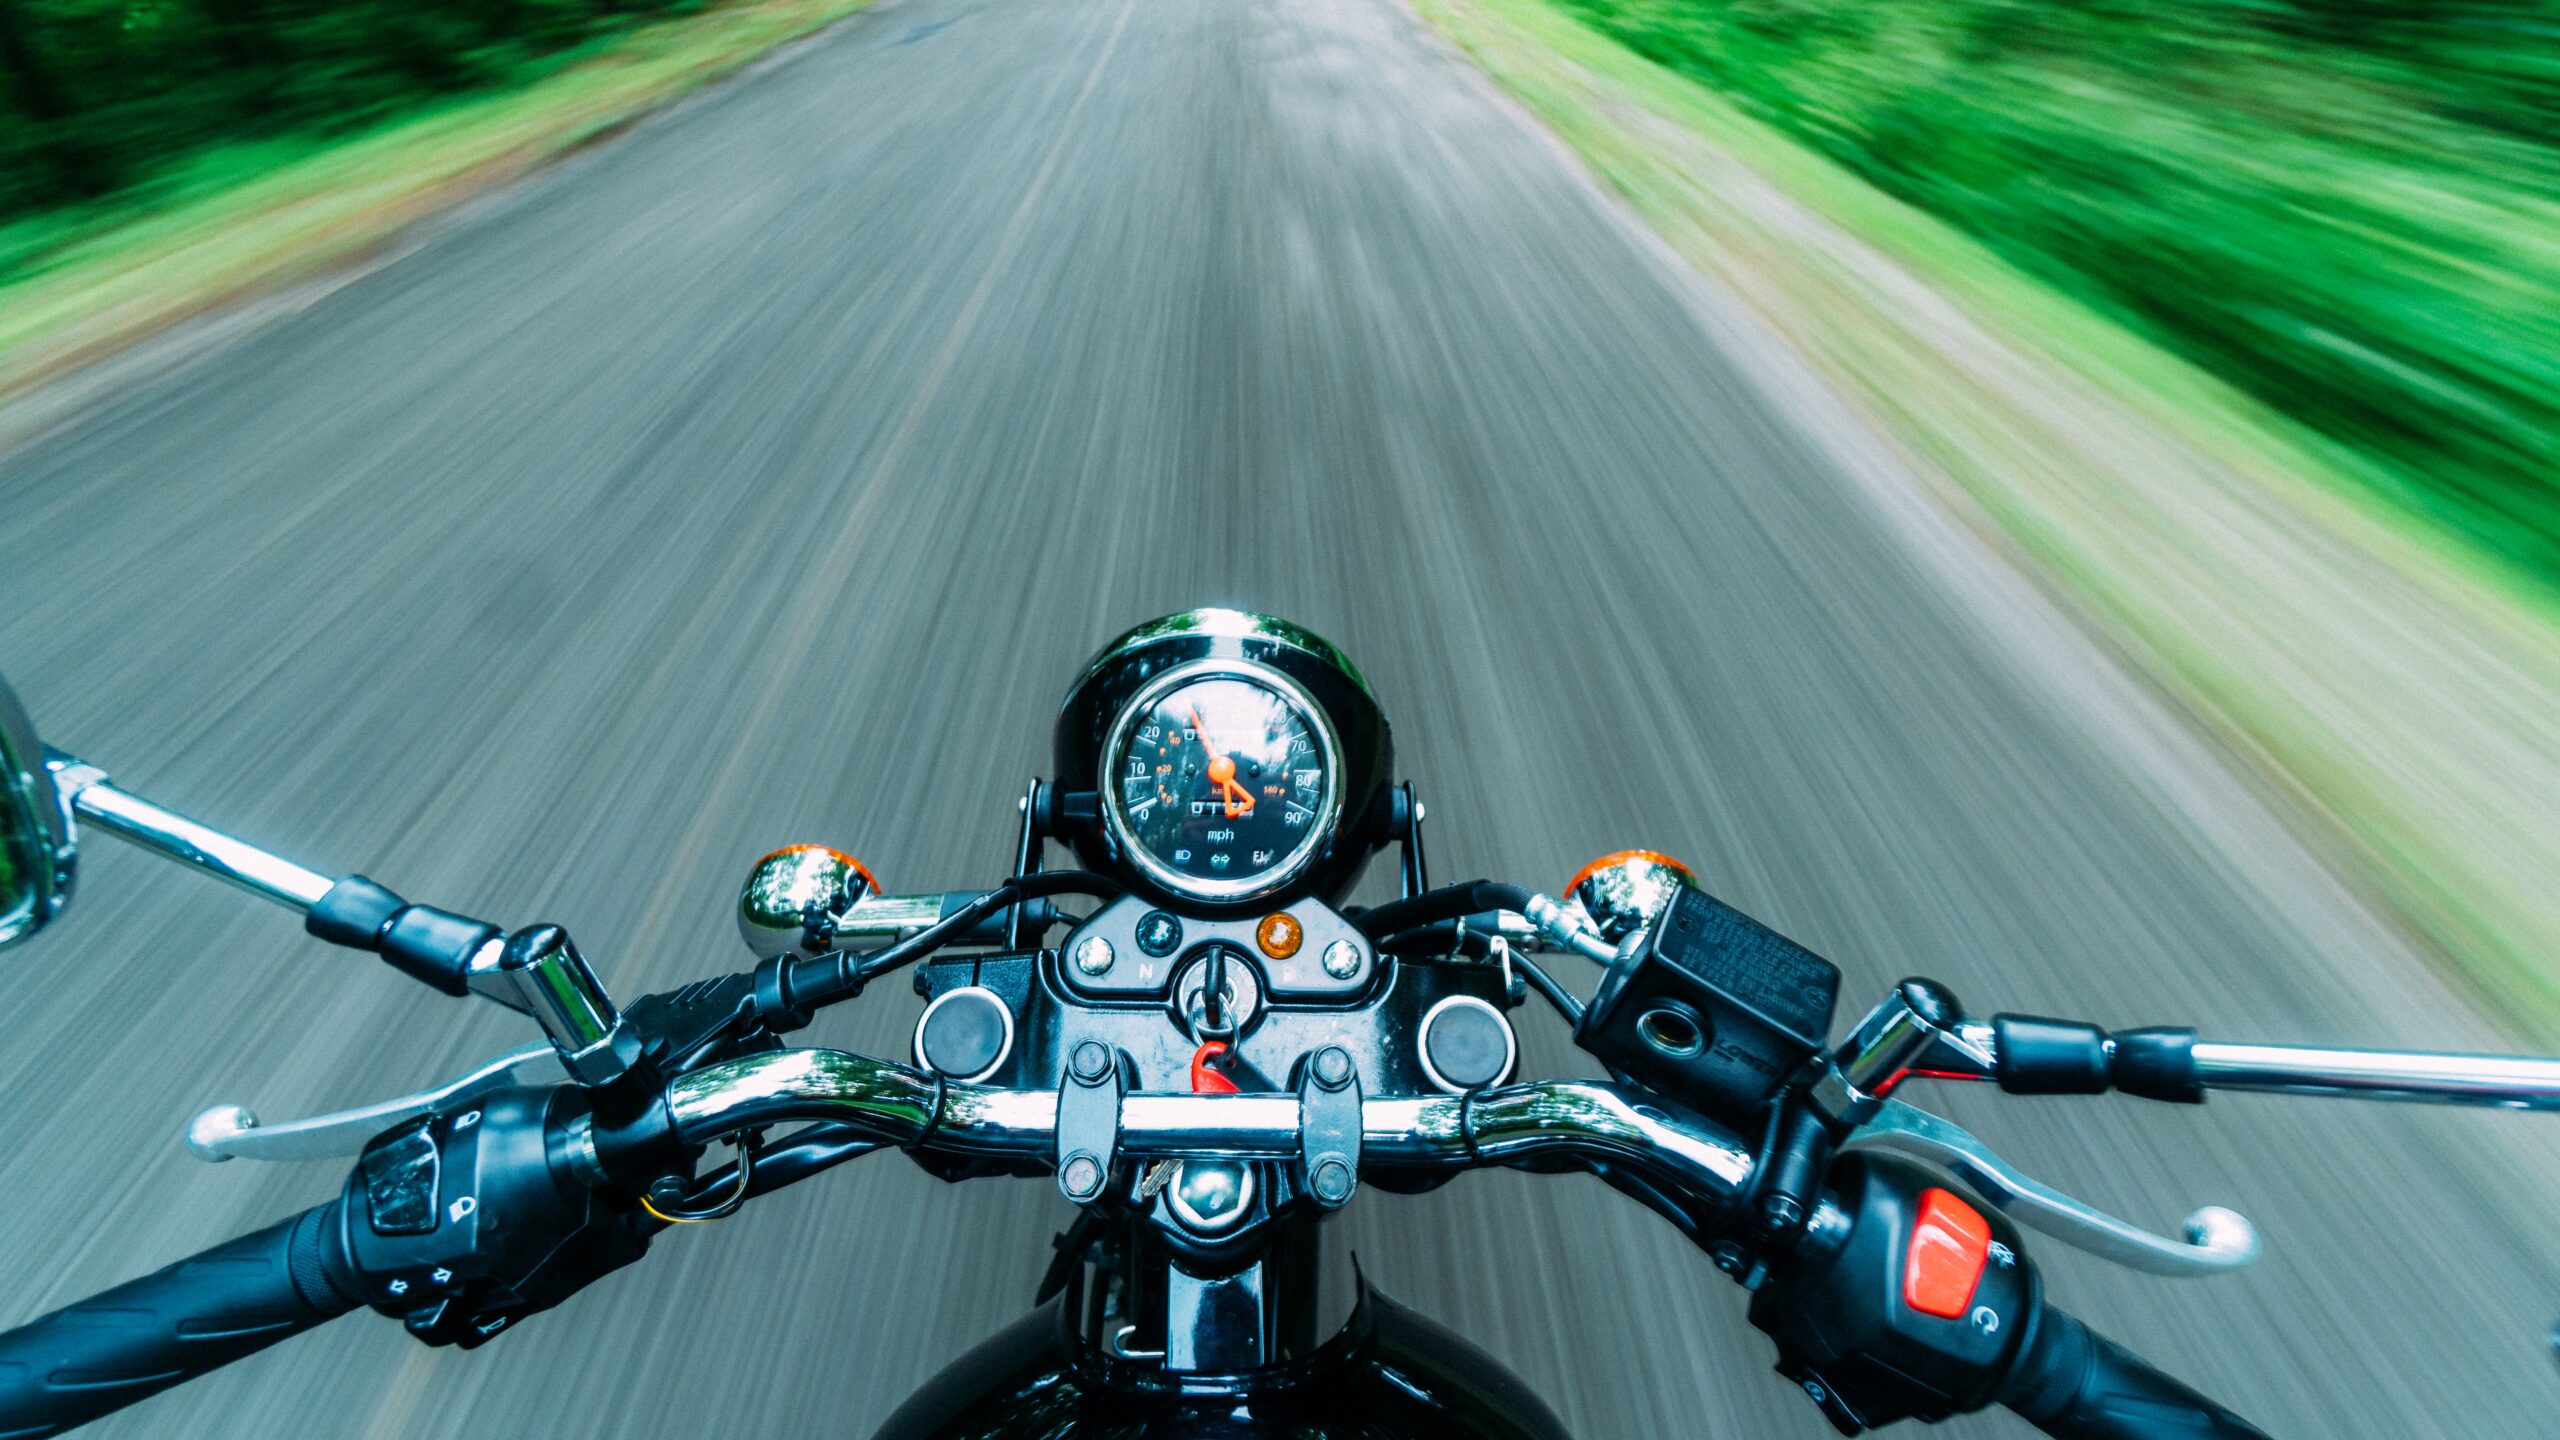 What Is the Most Famous Motorcycle Road